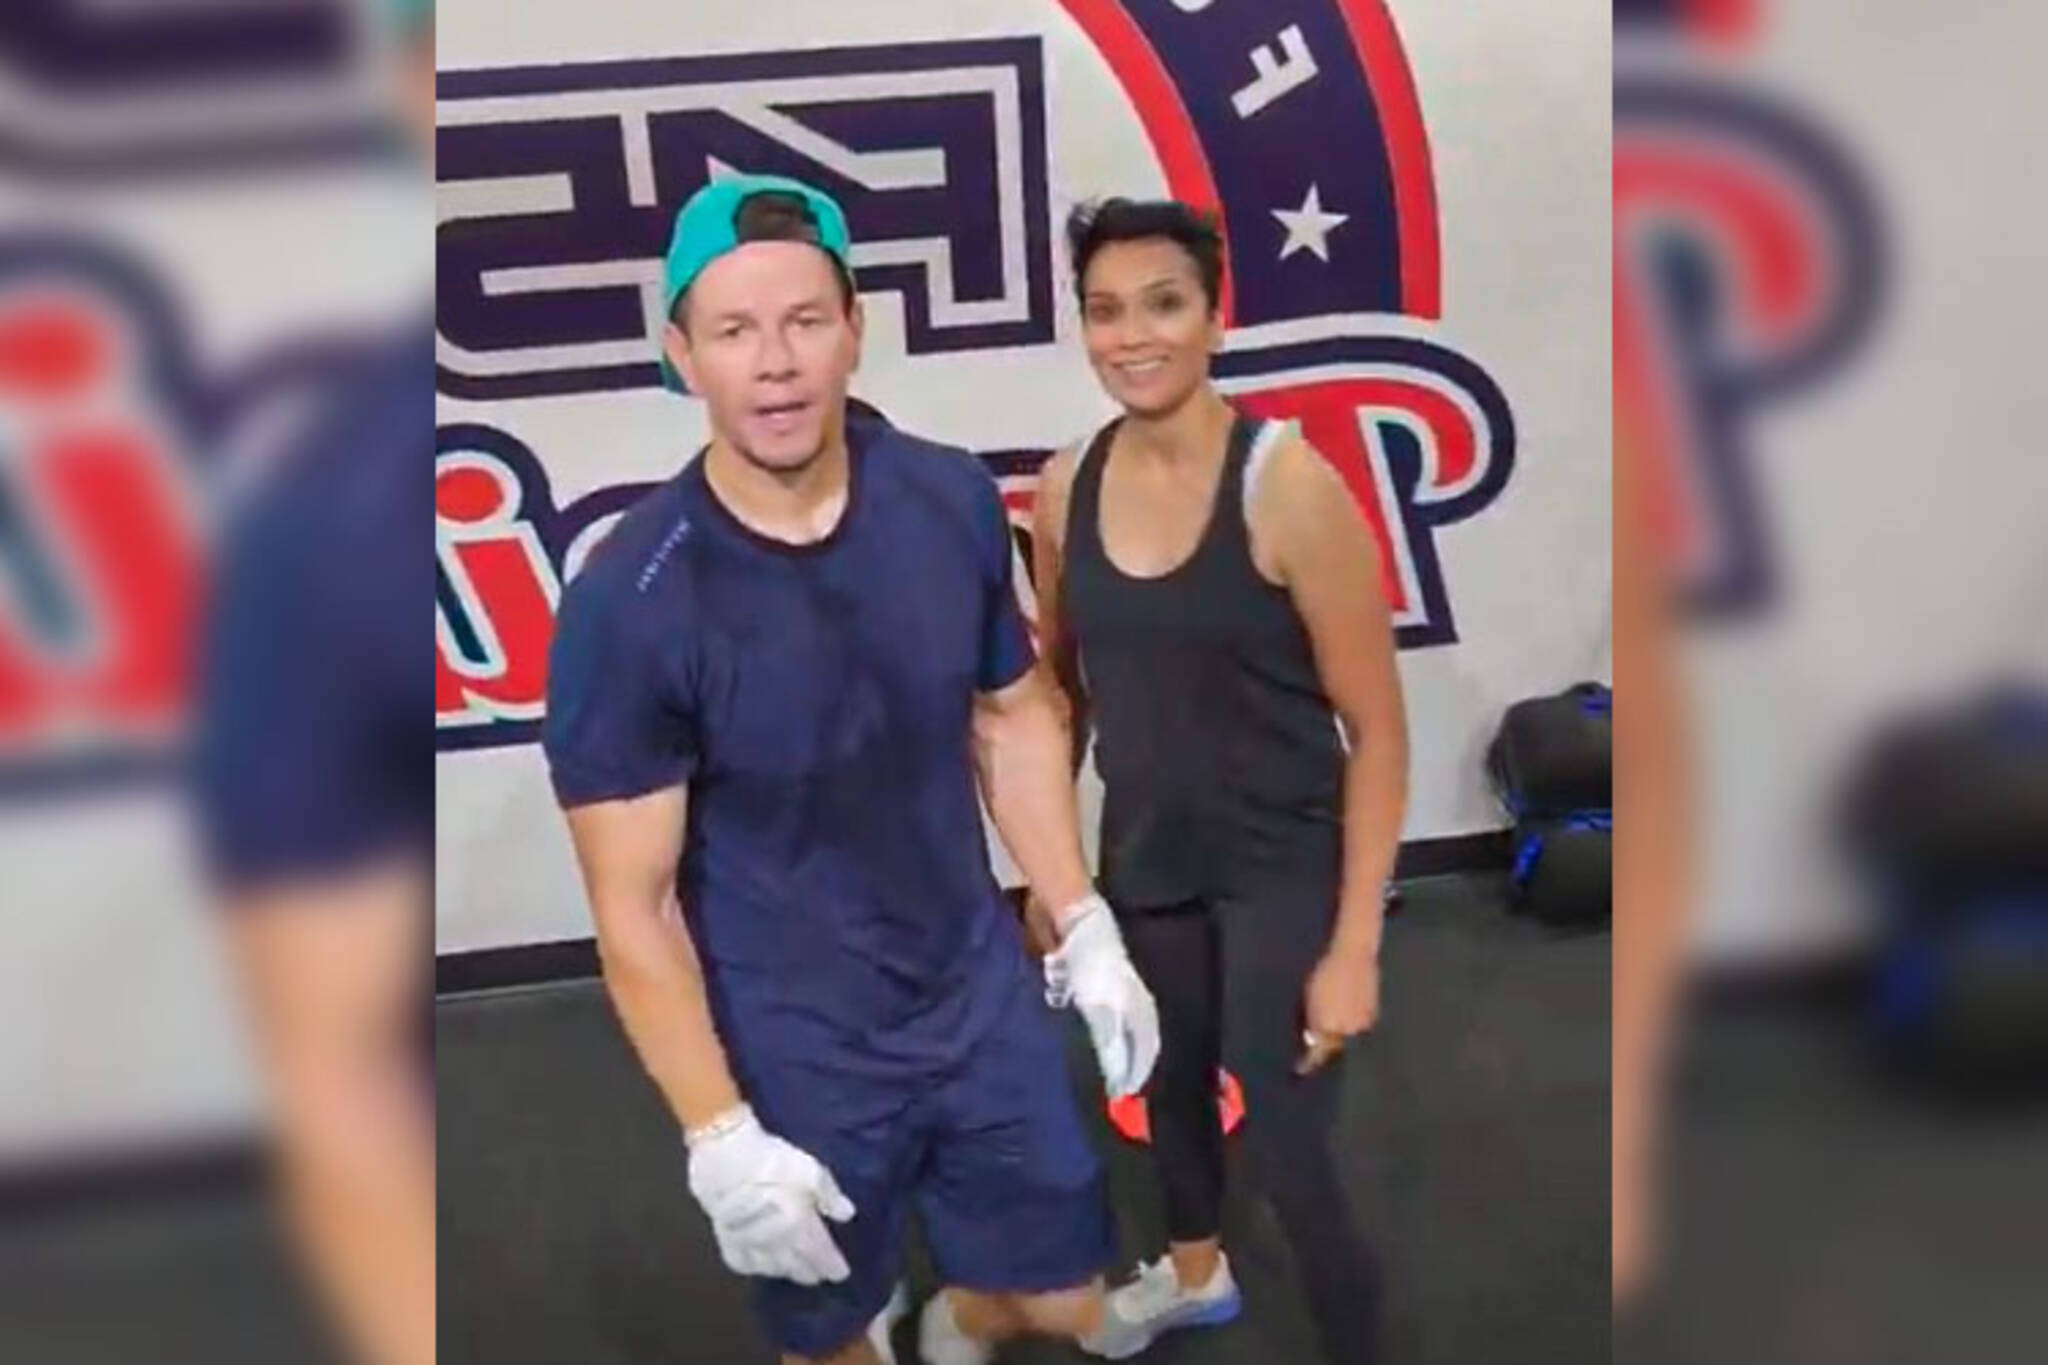 Mark Wahlberg's Full-Body F45 Workout - Muscle & Fitness